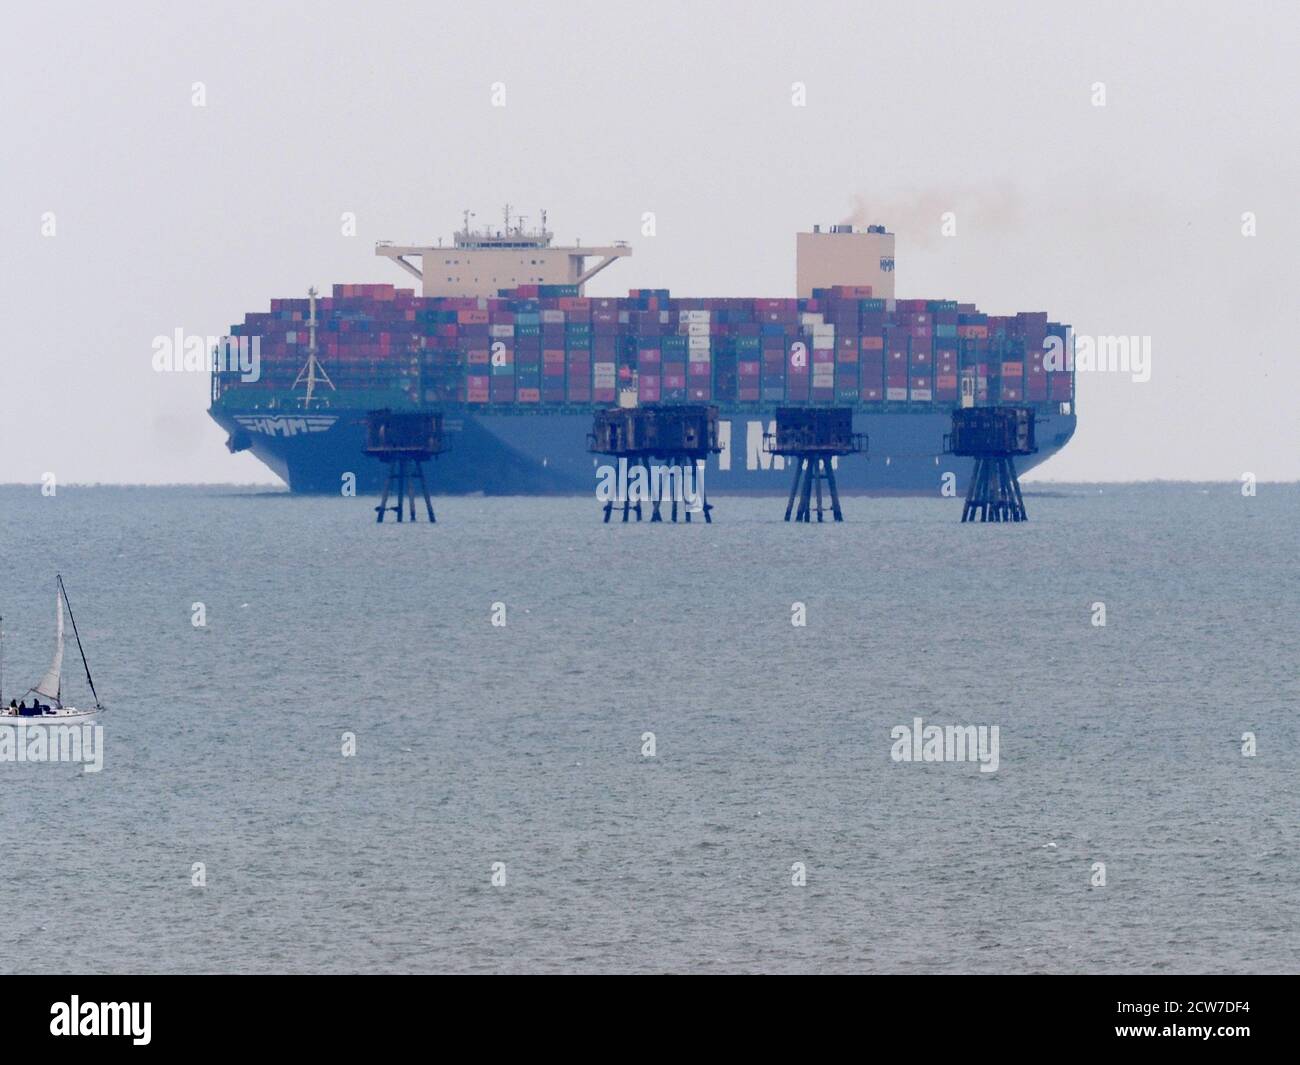 Warden, Kent, UK. 28th September, 2020. One of the world's largest container ships HMM Southampton seen passing the Red Sands Towers in the Thames Estuary from Warden, Kent at lunchtime. Credit: James Bell/Alamy Live News Stock Photo